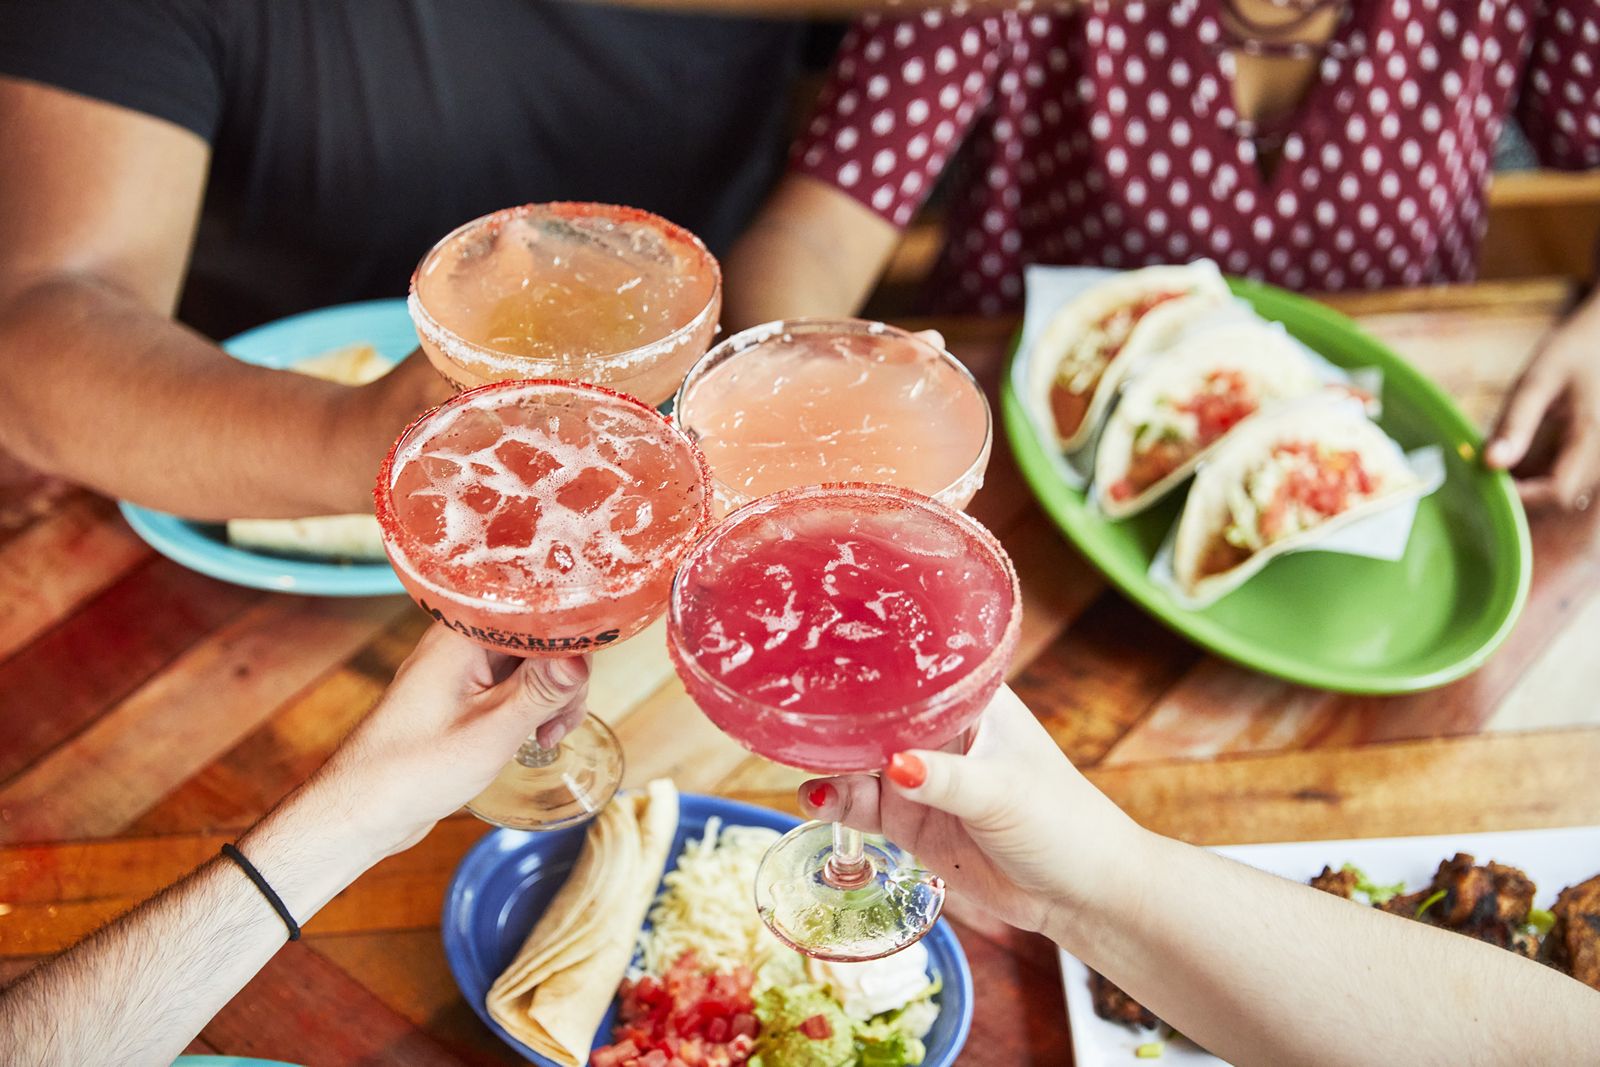 Margaritas Mexican Restaurants Announces Multi-Unit Franchise Agreement to Expand in New Jersey